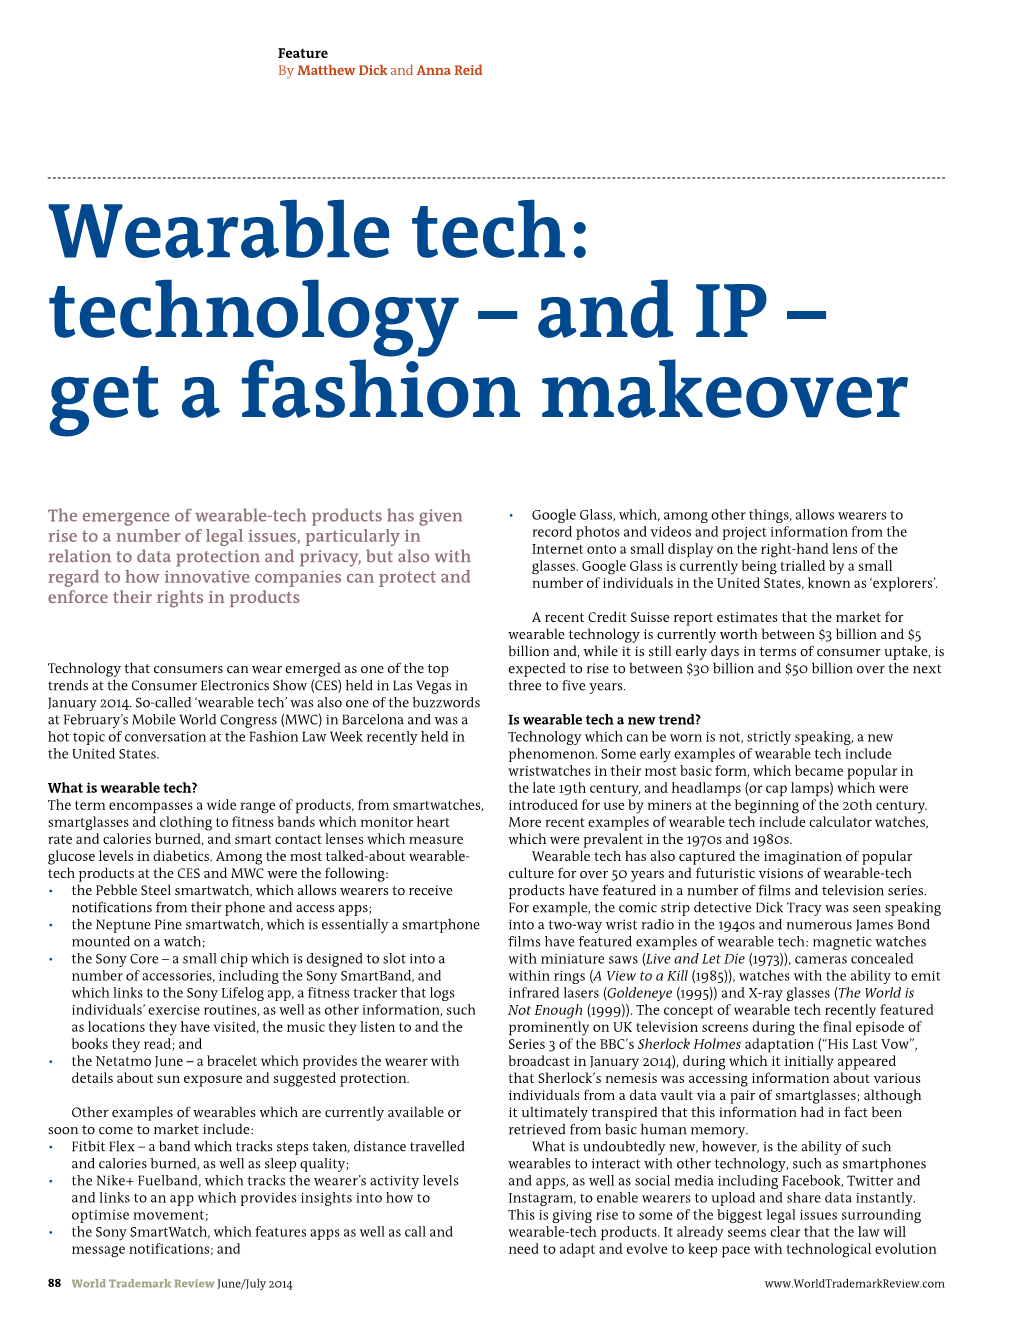 Wearable Tech: Technology – and IP – Get a Fashion Makeover